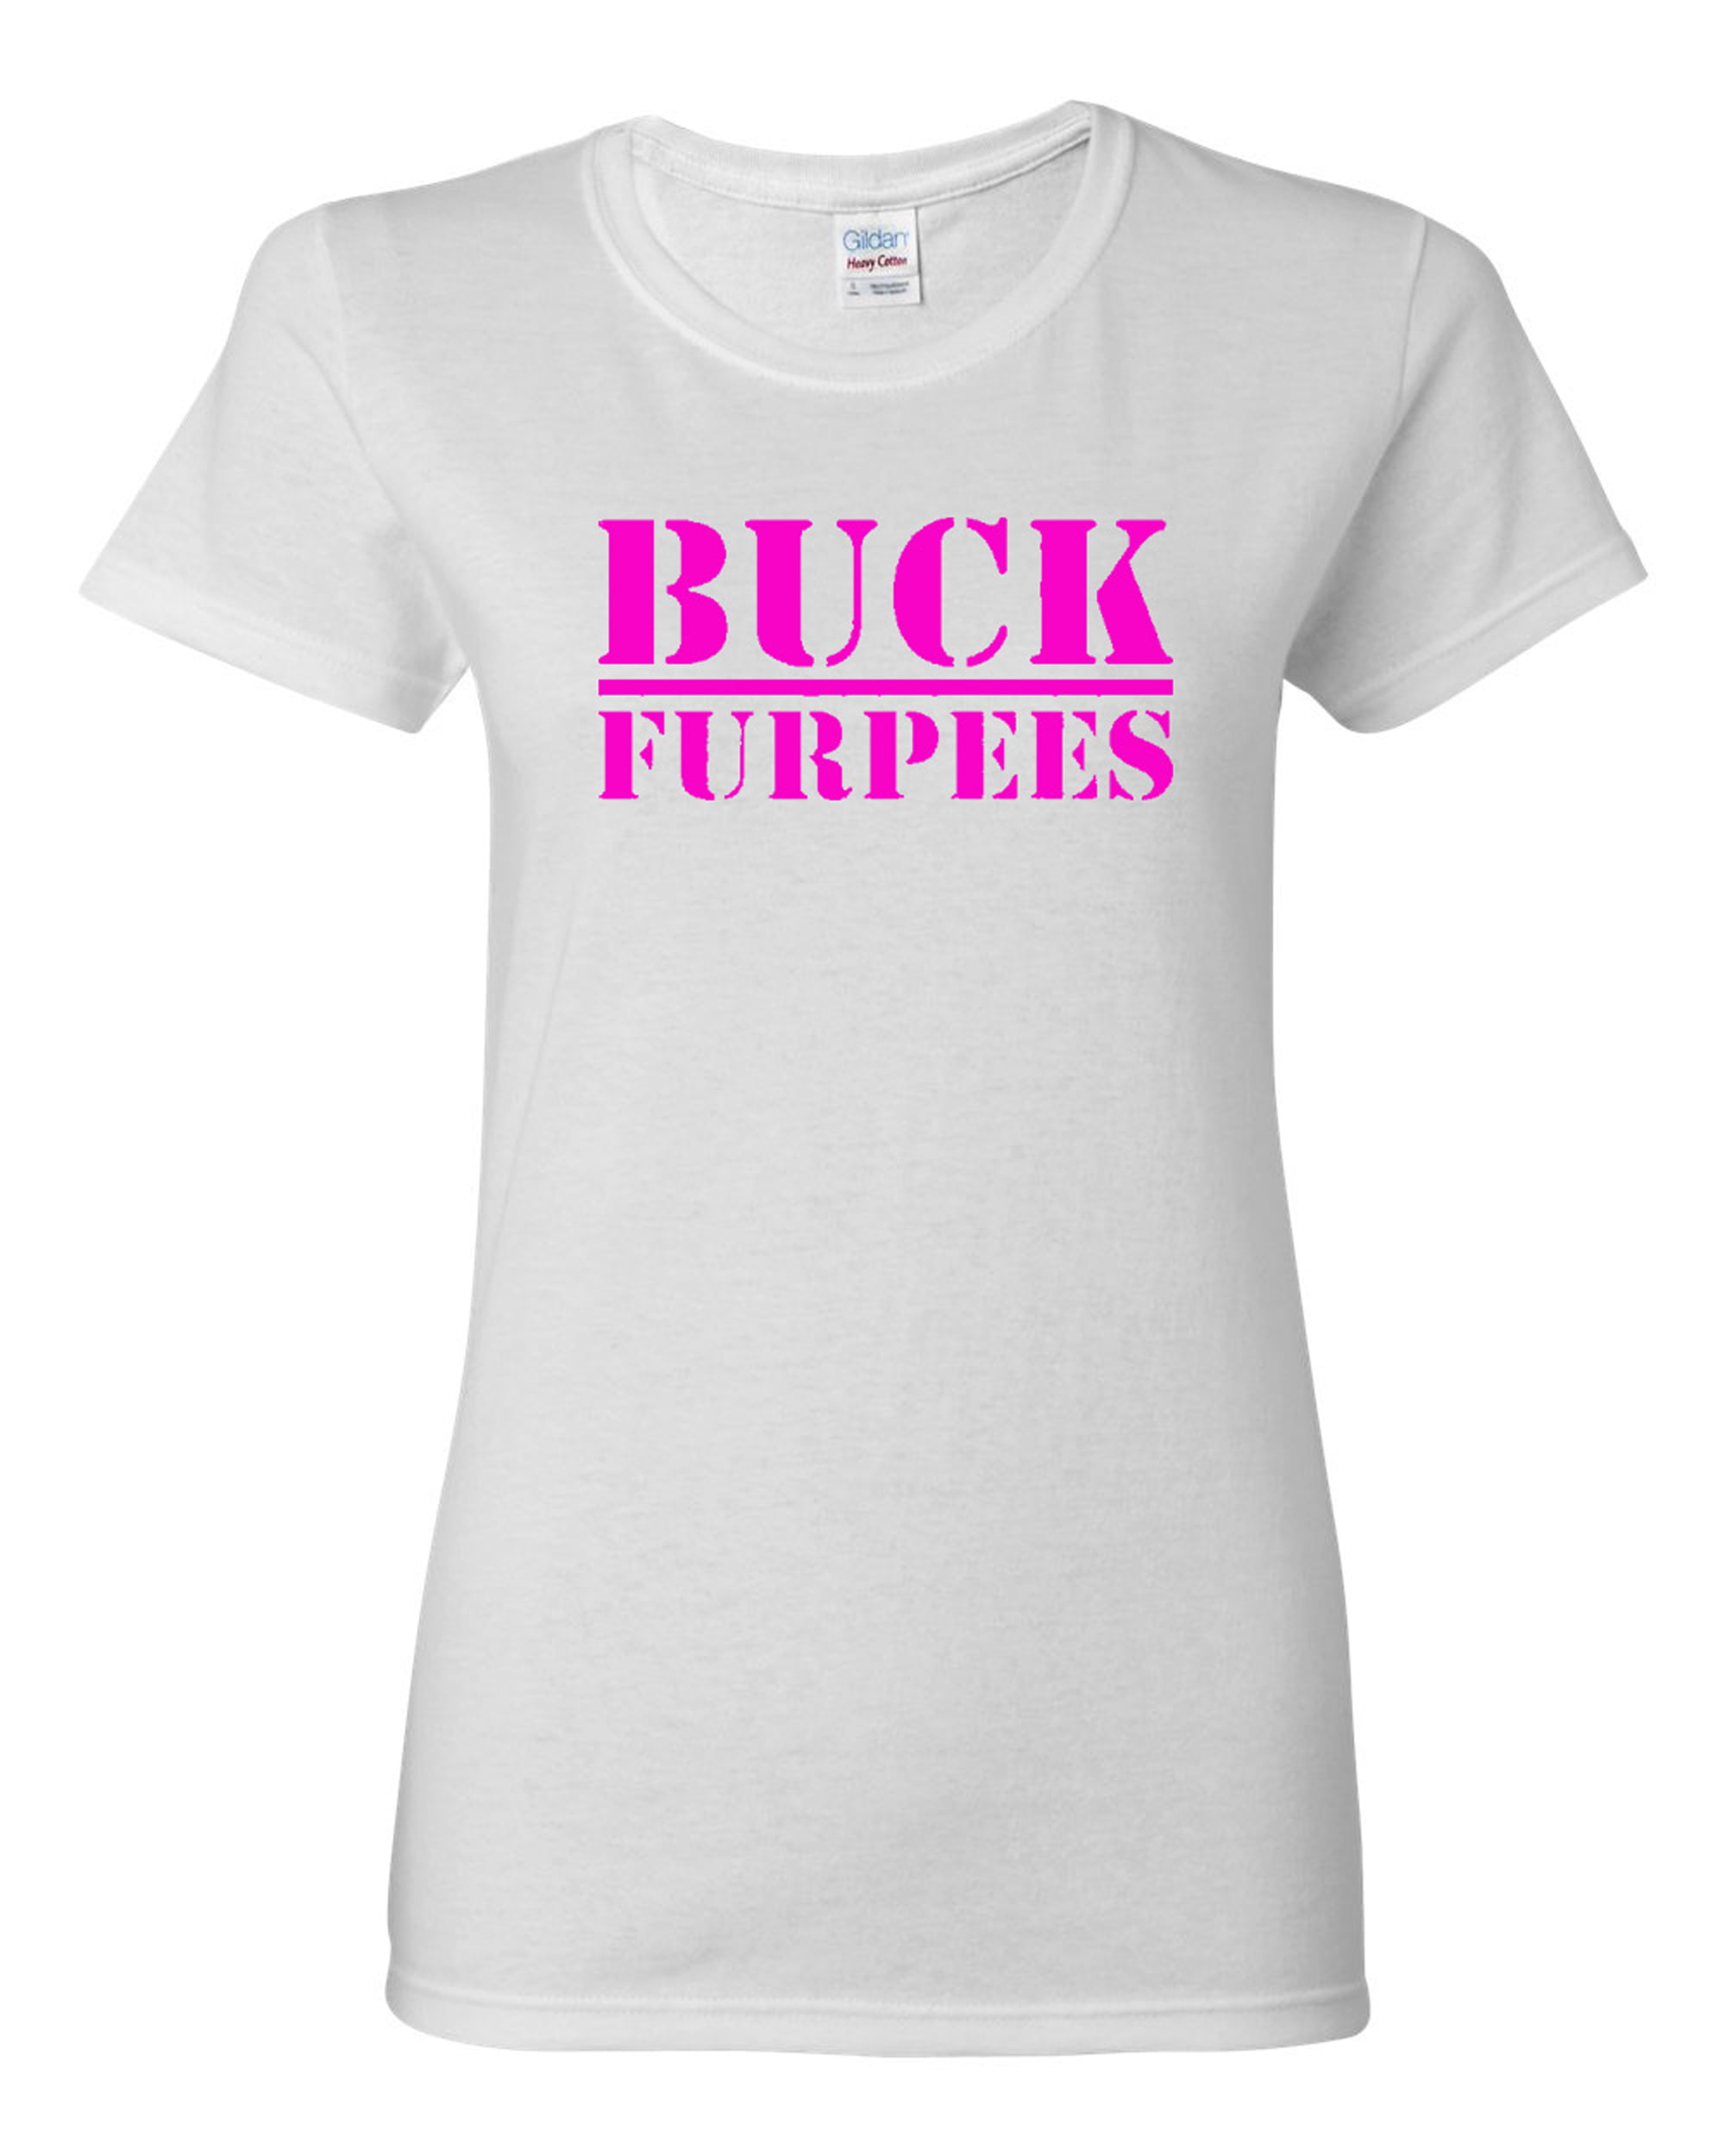 Funny Joke Furpees Buck Birthday Gift Funny Adult Top Buck Furpees T-Shirt 